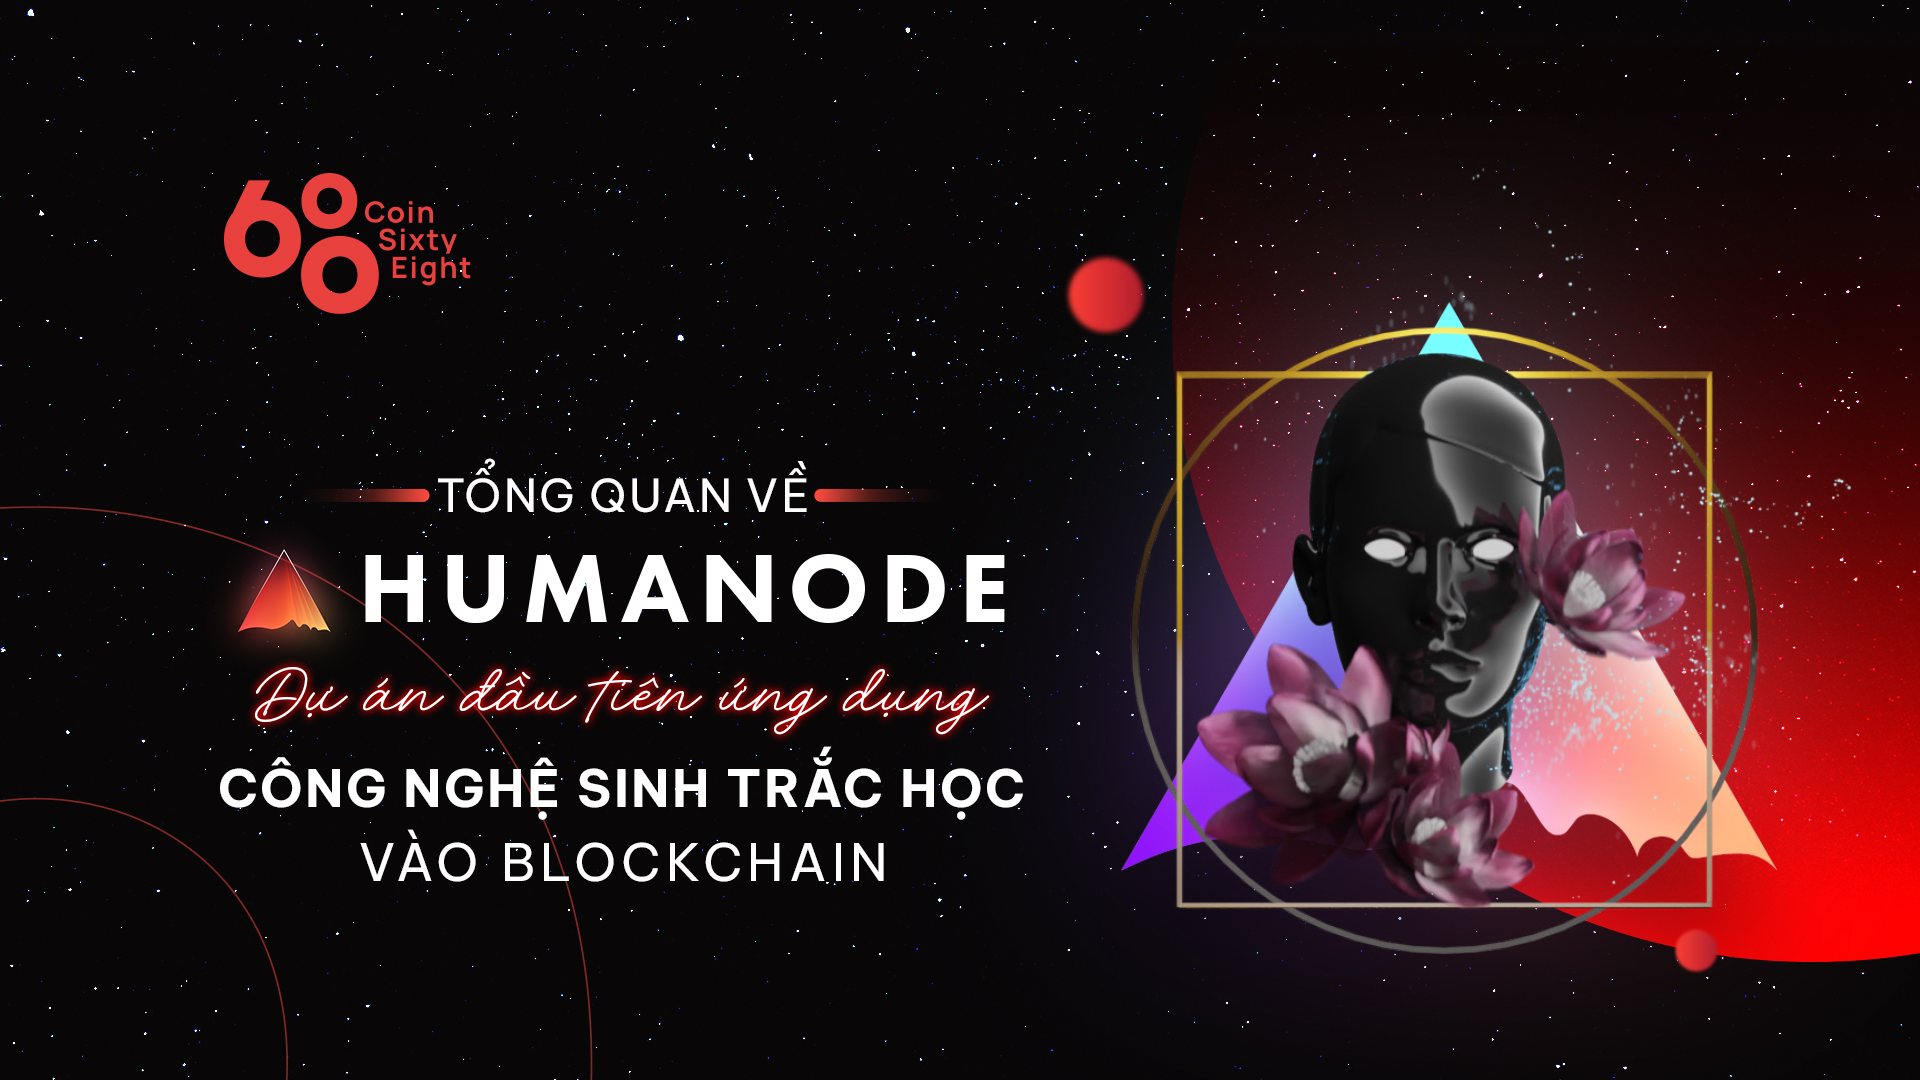 Humanode project overview